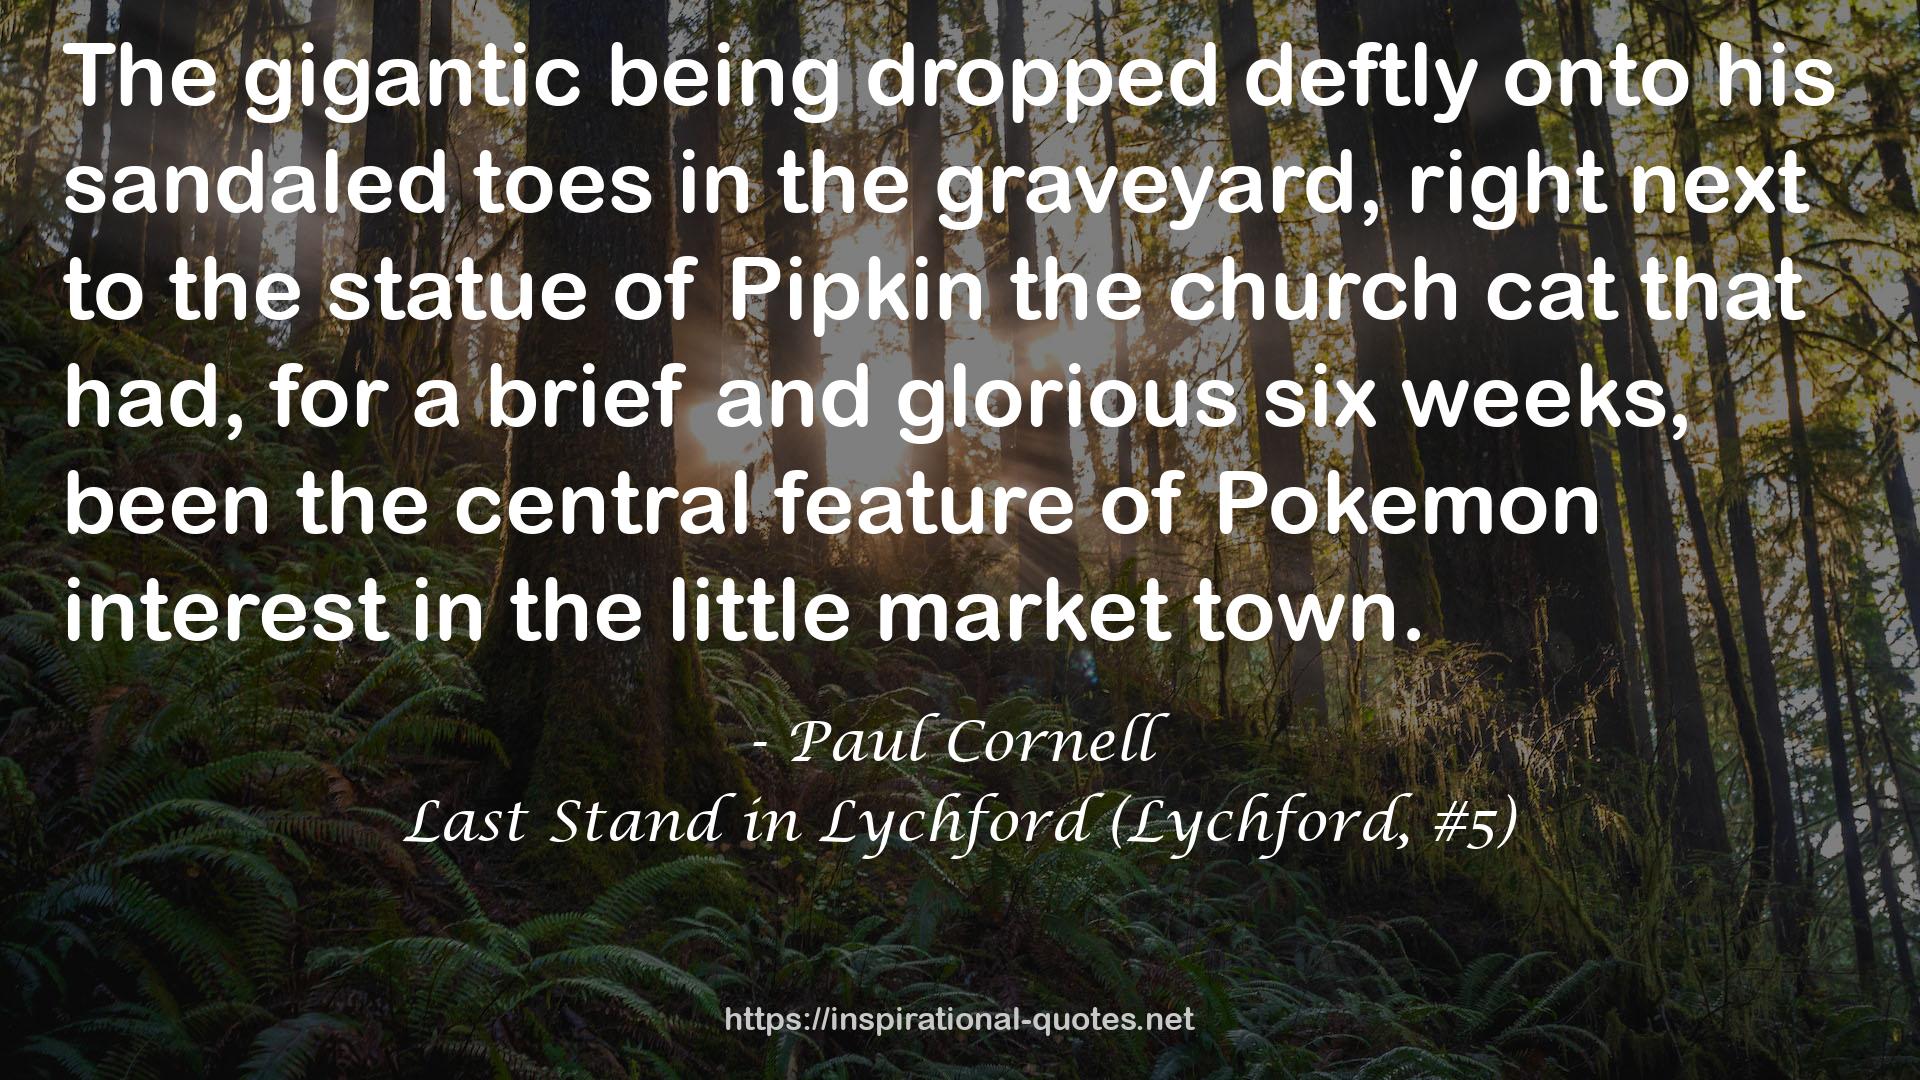 Last Stand in Lychford (Lychford, #5) QUOTES